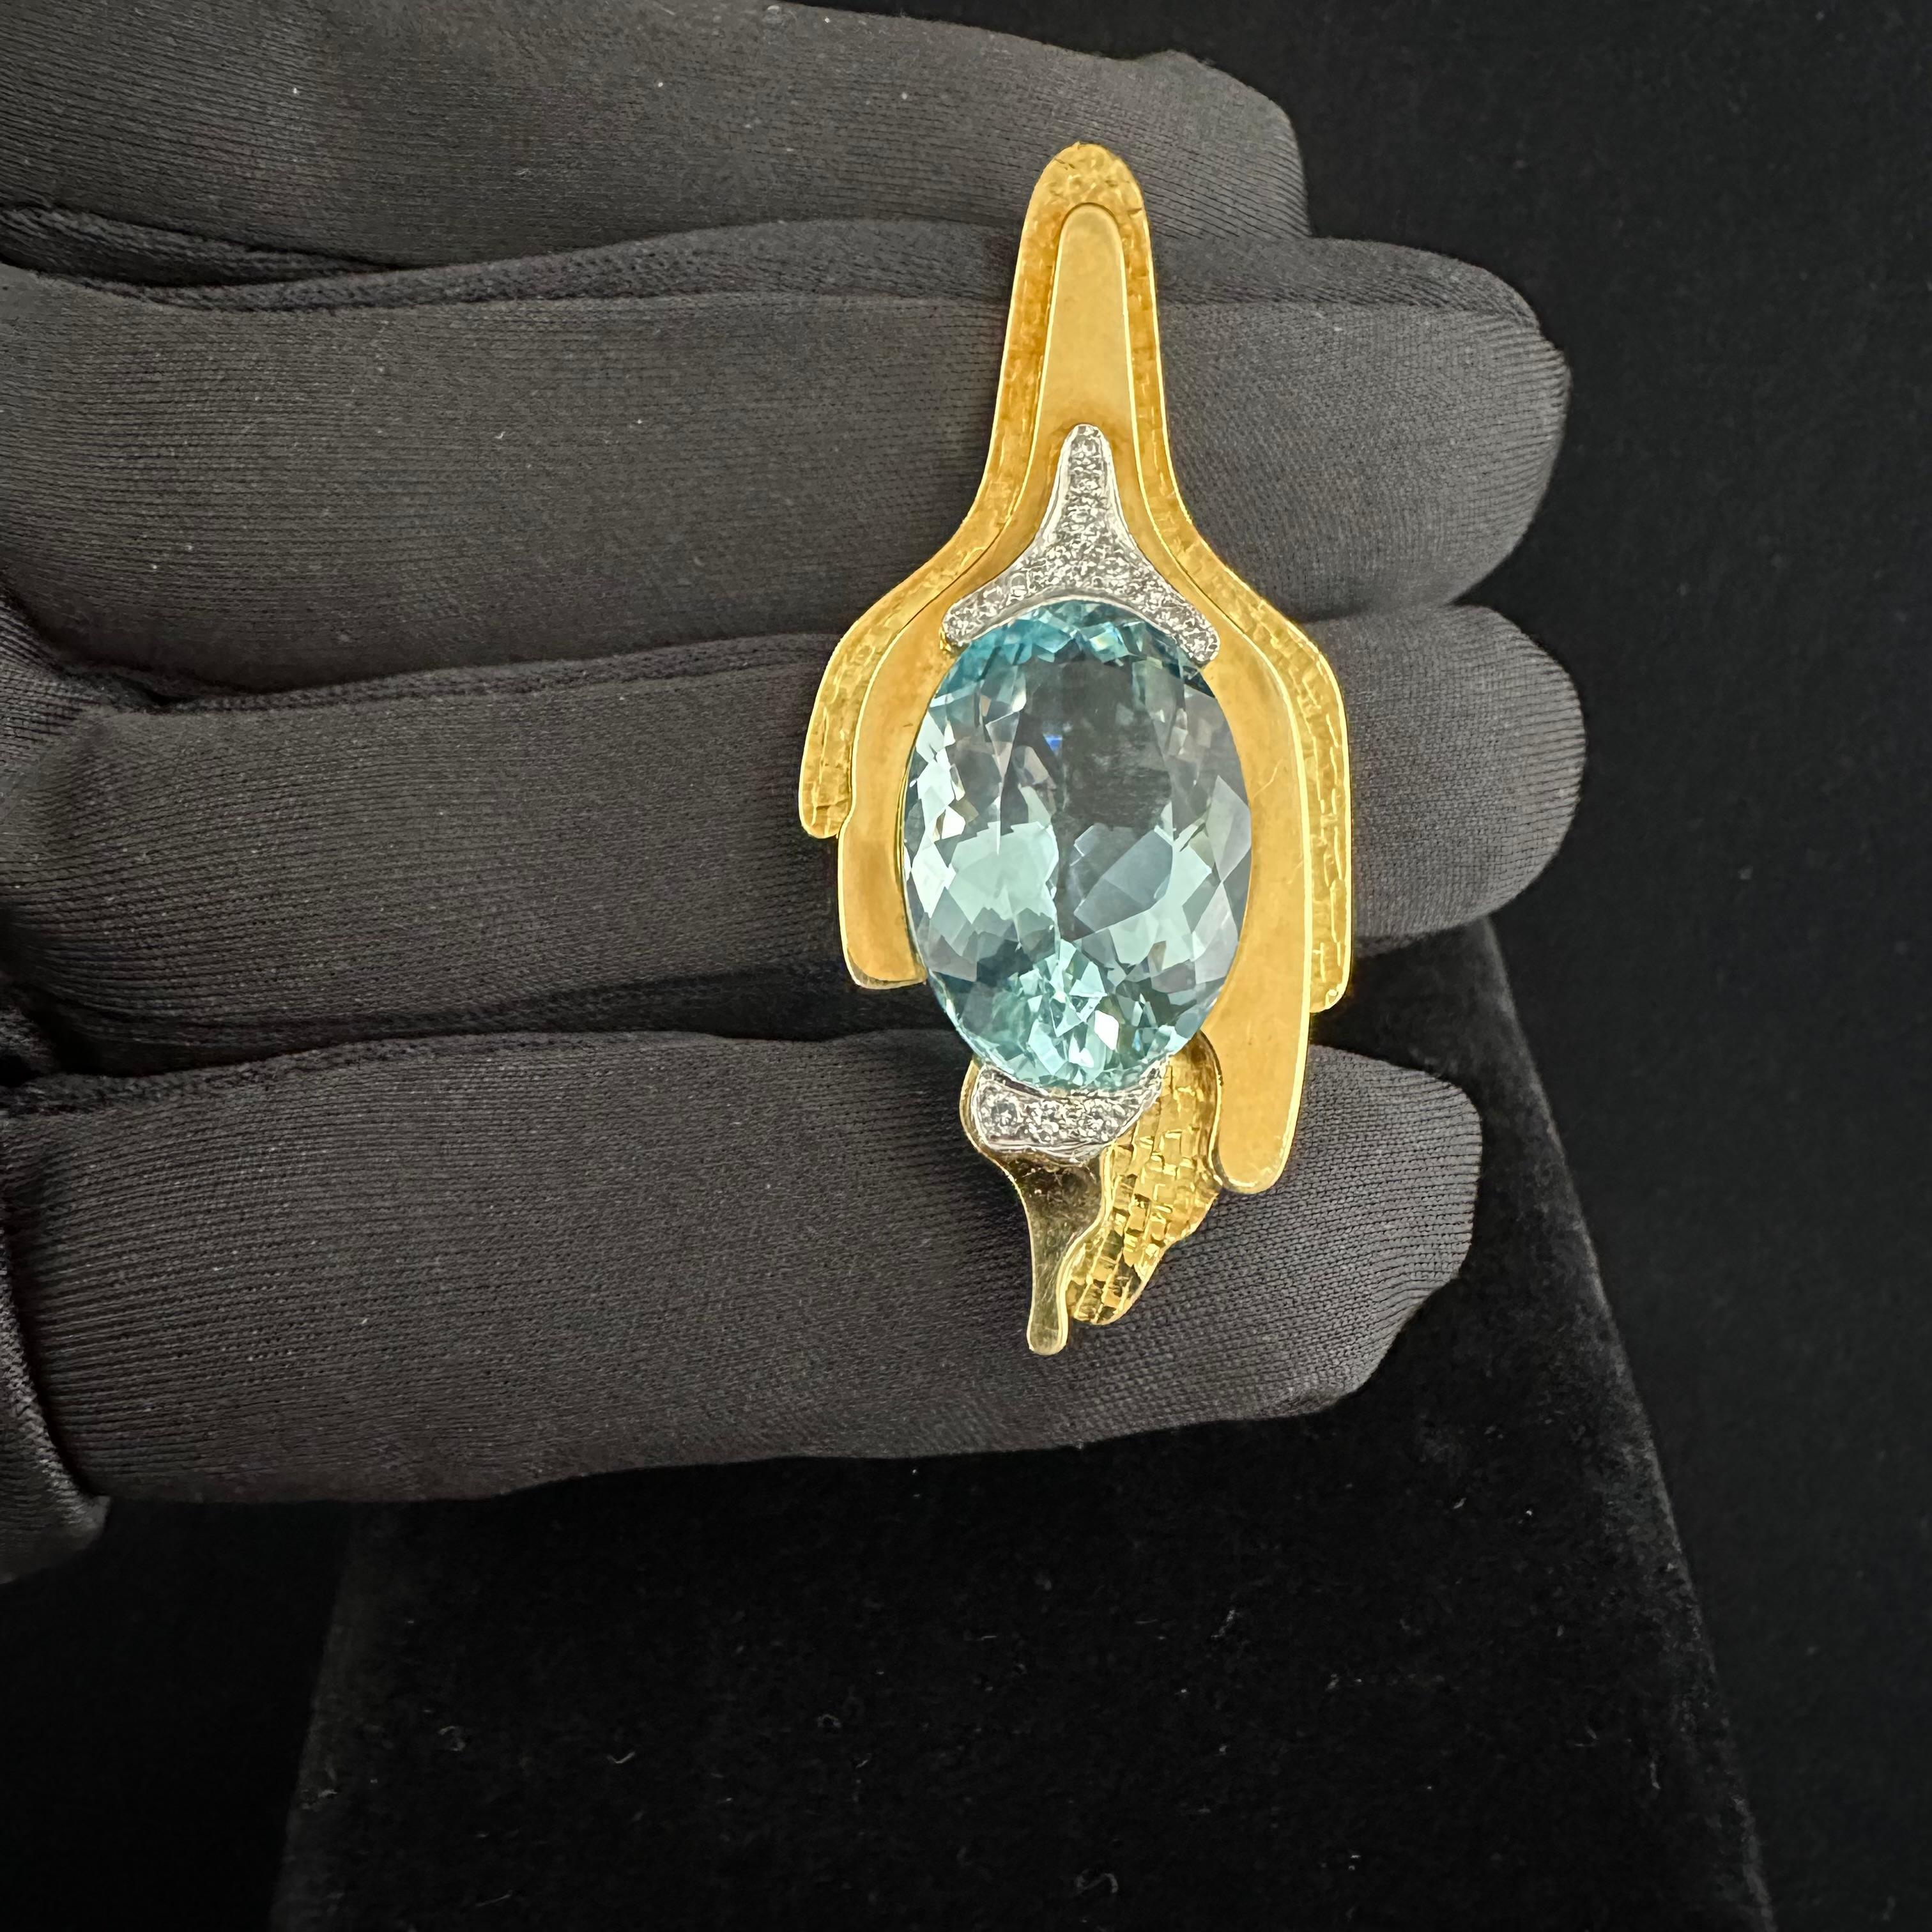 Andrew Grima
Known as the doyen of modern jewelry design. 
Up for Sale   
A Large Oval Aquamarine set in 18k Yellow Gold approx 10Ct Aqua.
Length 2.25 Inches by 1 inch Width
14 Round Diamonds 
Beautiful Textured Gold contoured to a highly polished